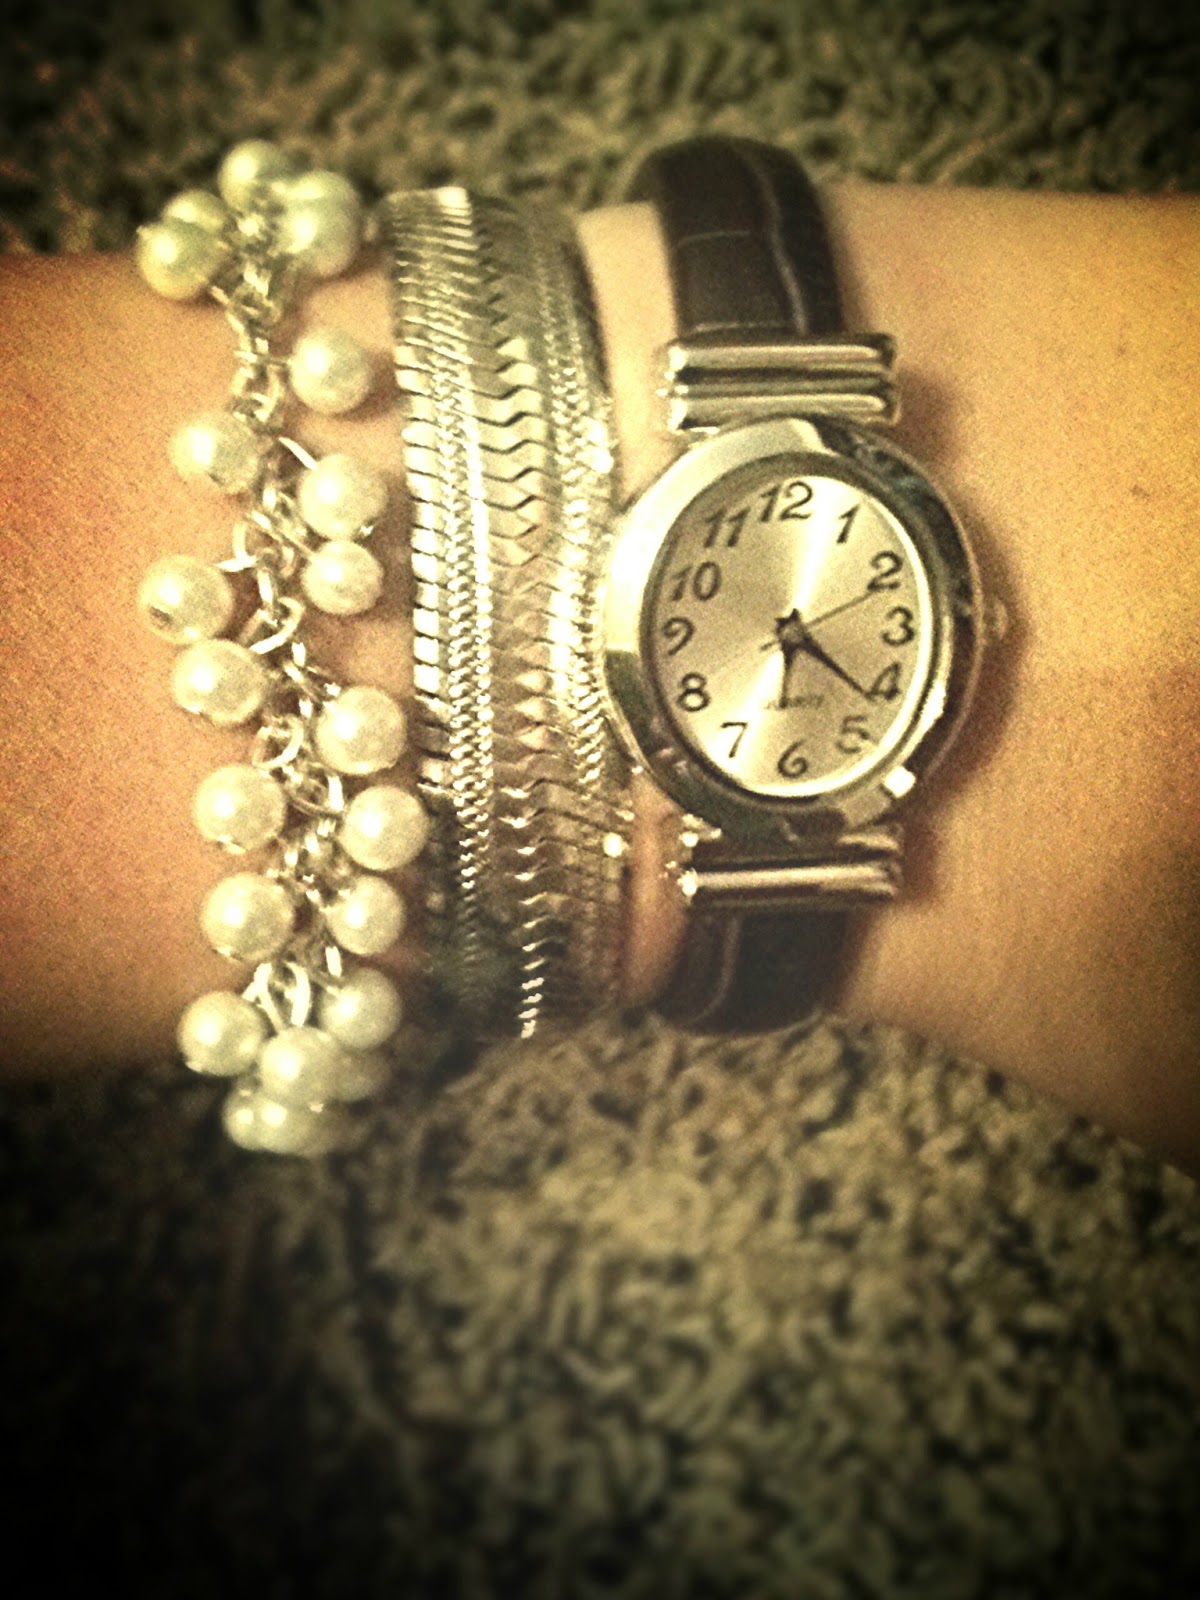 Fancy That Style: Arm Candy: Stacking Bracelets and Watches